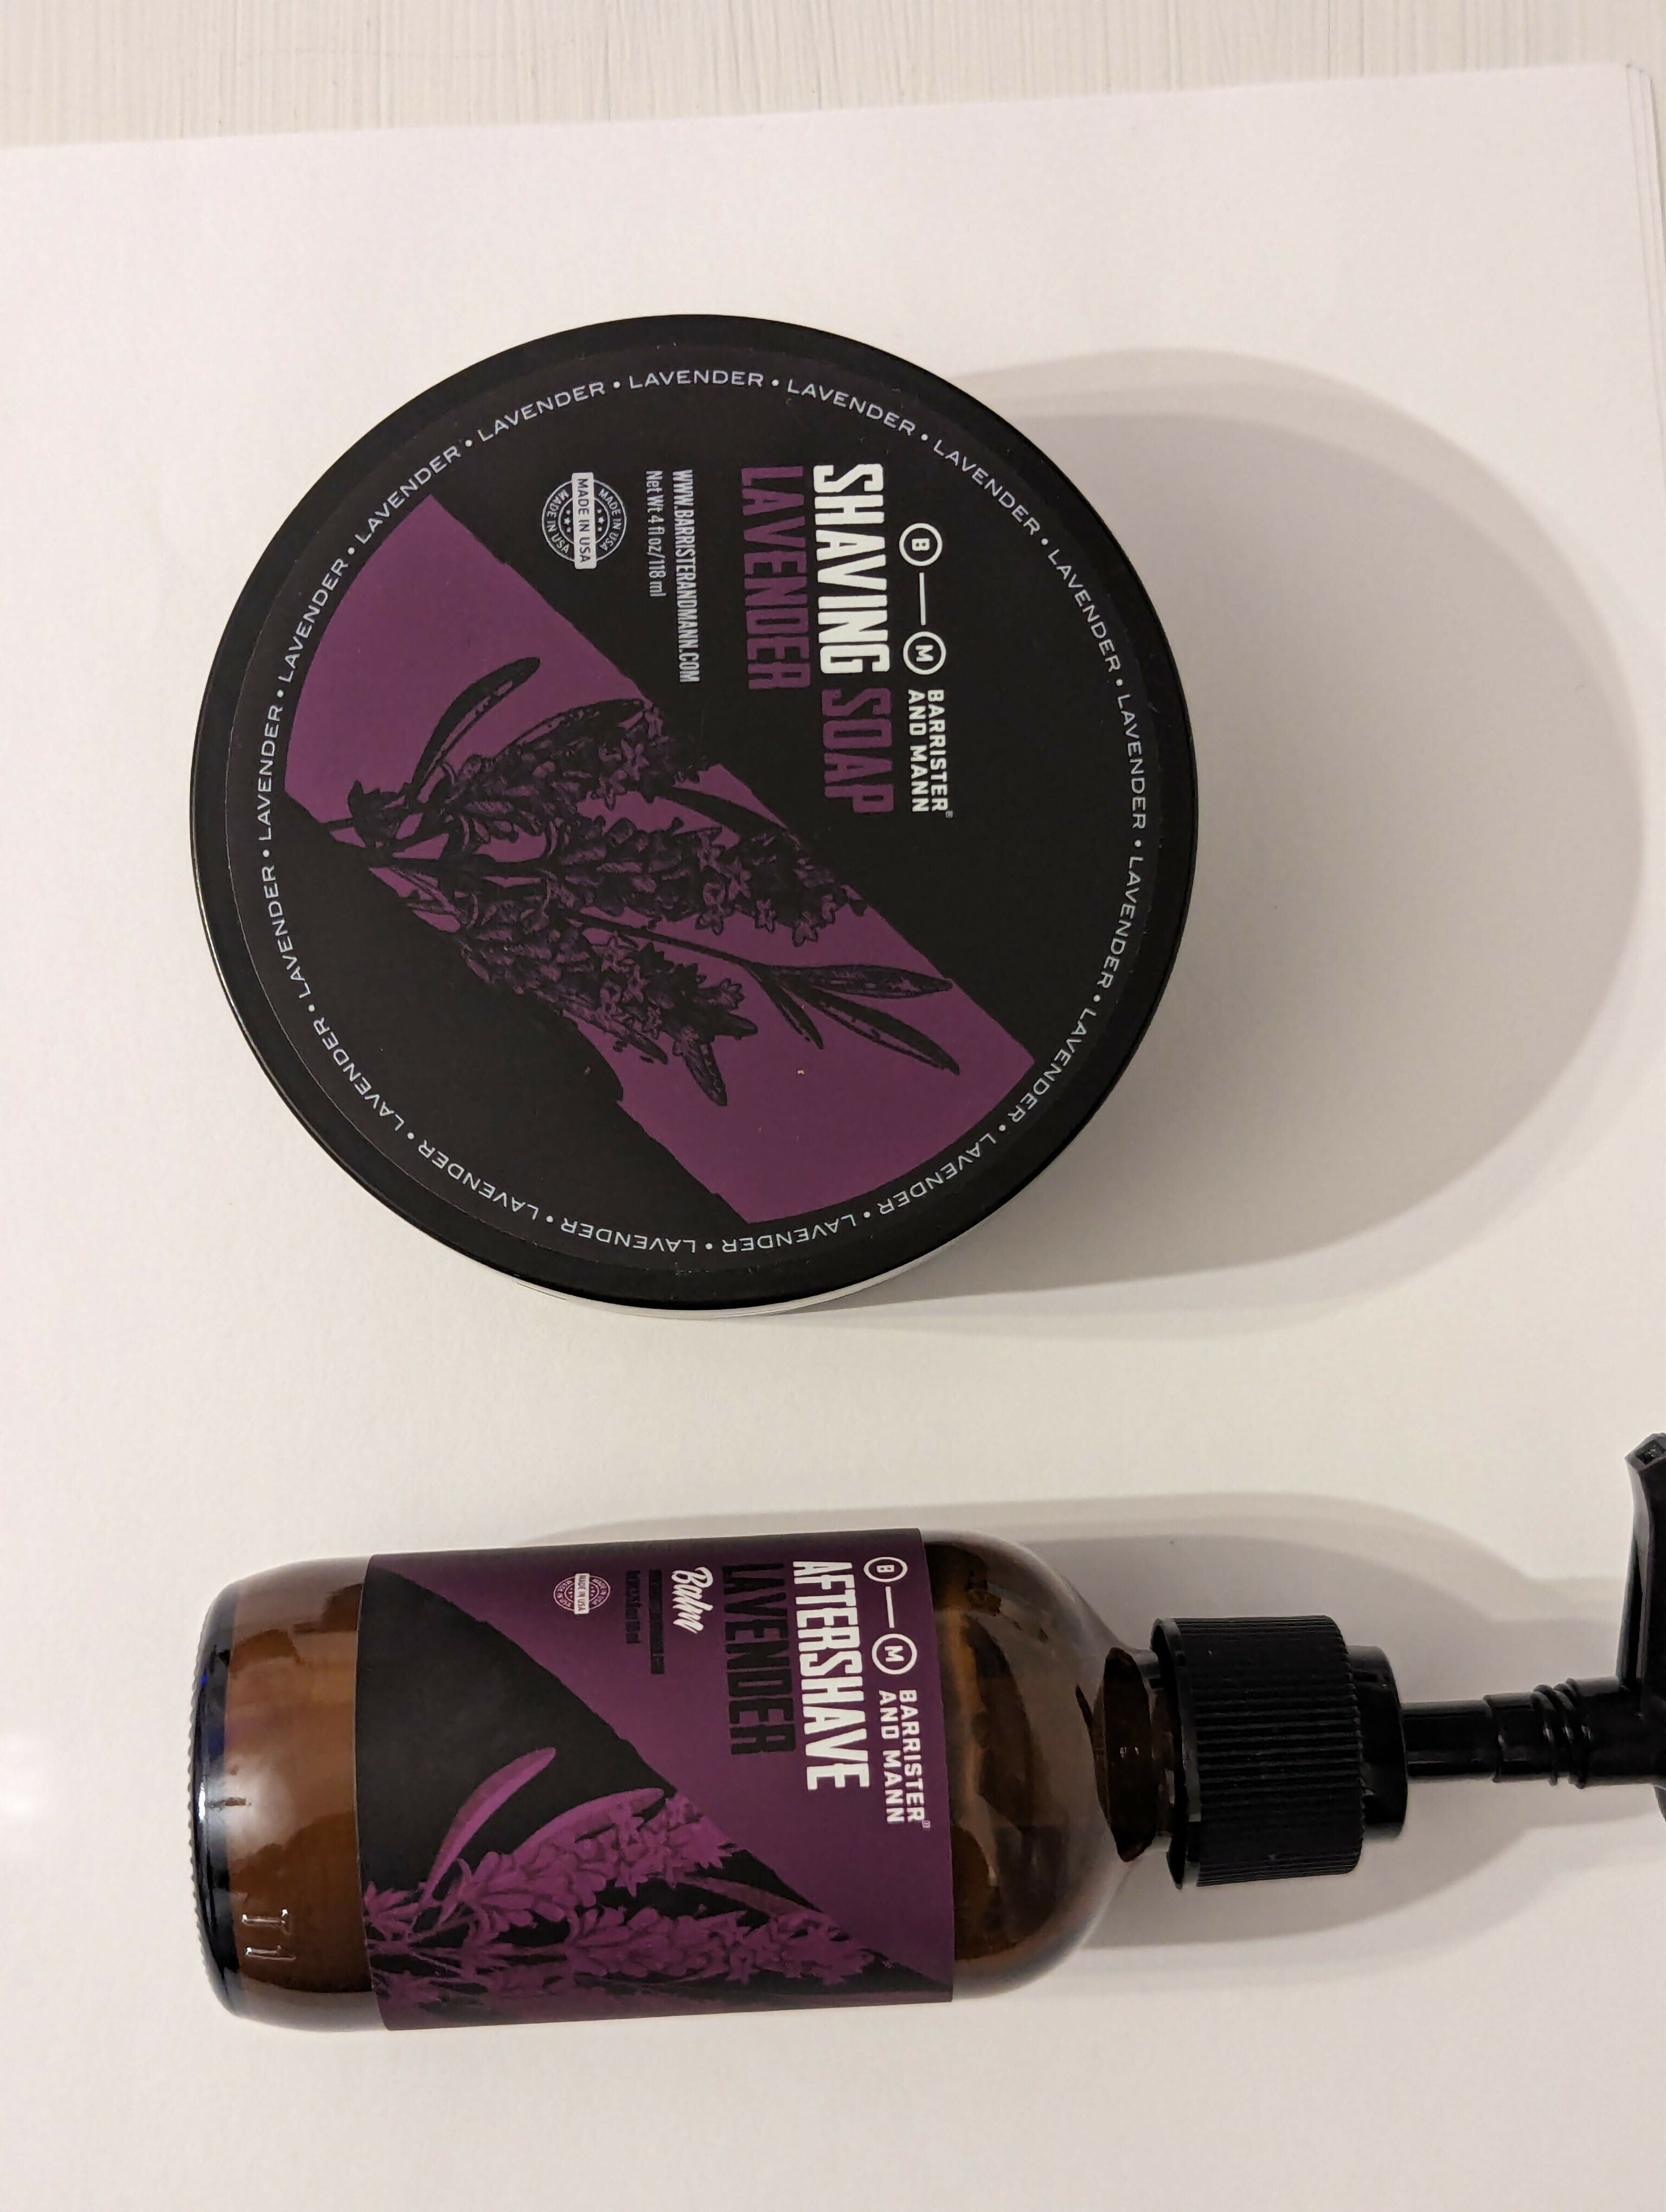 Barrister and Mann Lavender Shaving Soap and Balm Soap and Aftershave Bundle Jojo Zee. 